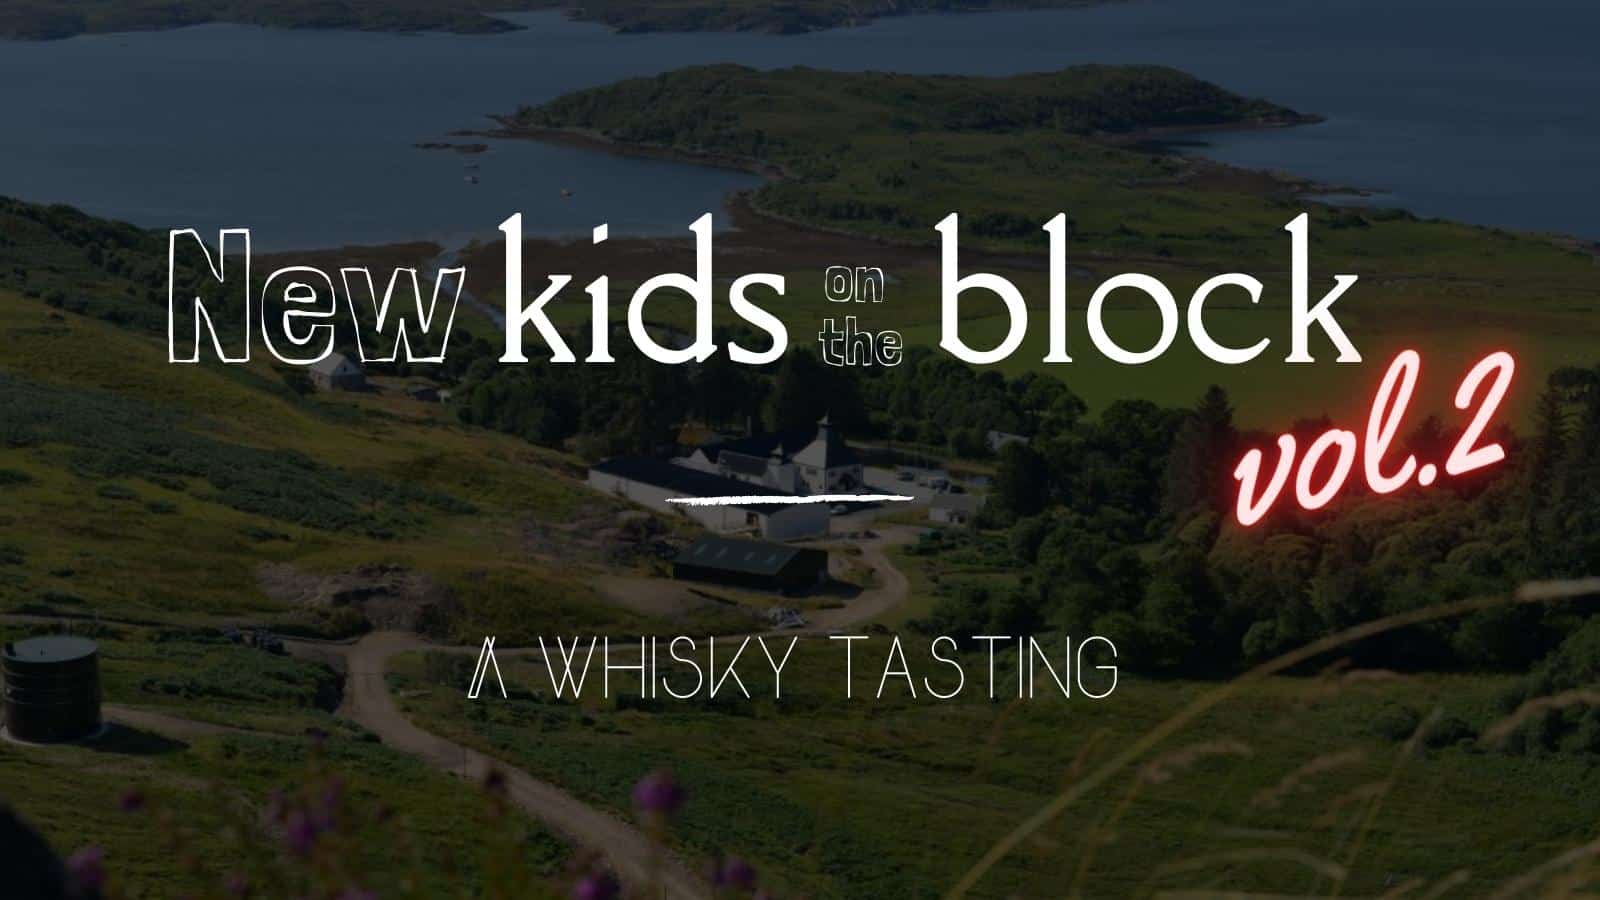 New kids on the block – Vol.2: A Whisky Tasting